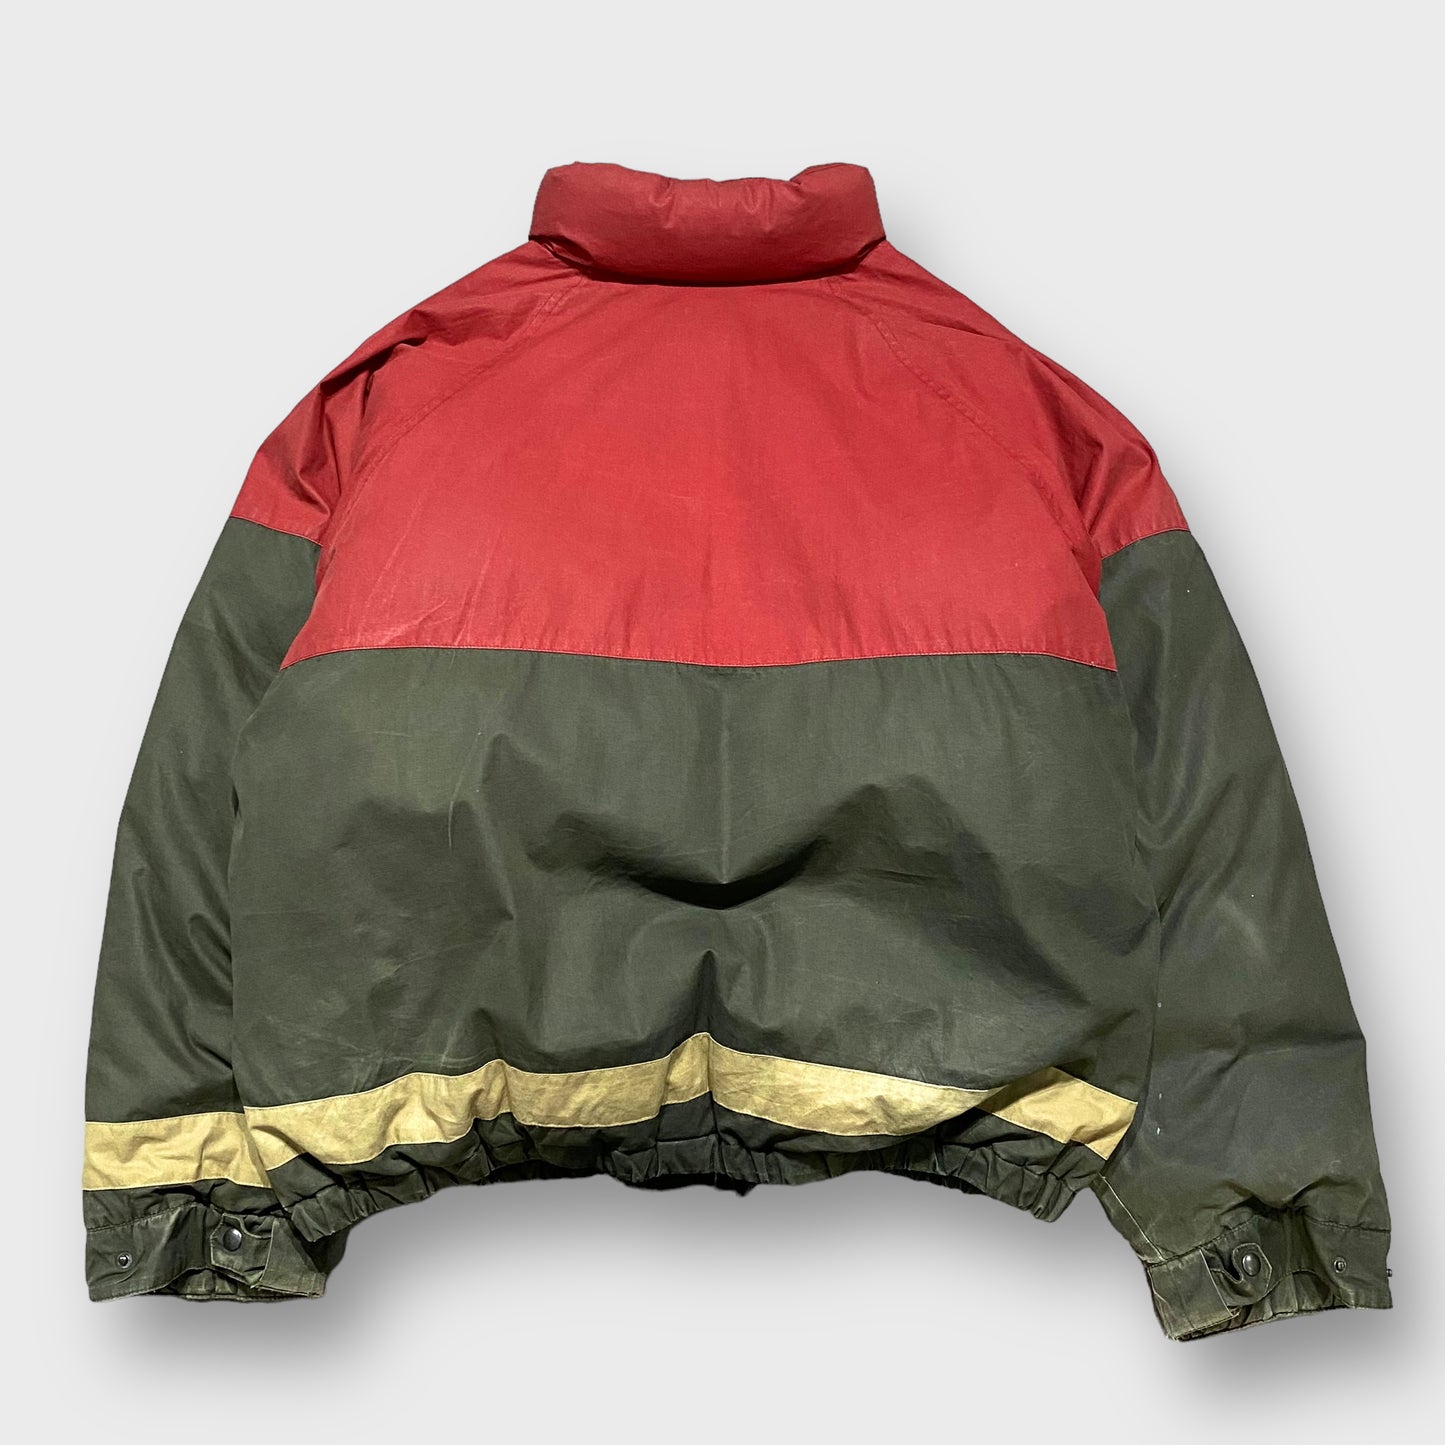 90's "Ralph Lauren POLO COUNTRY" Down jacket